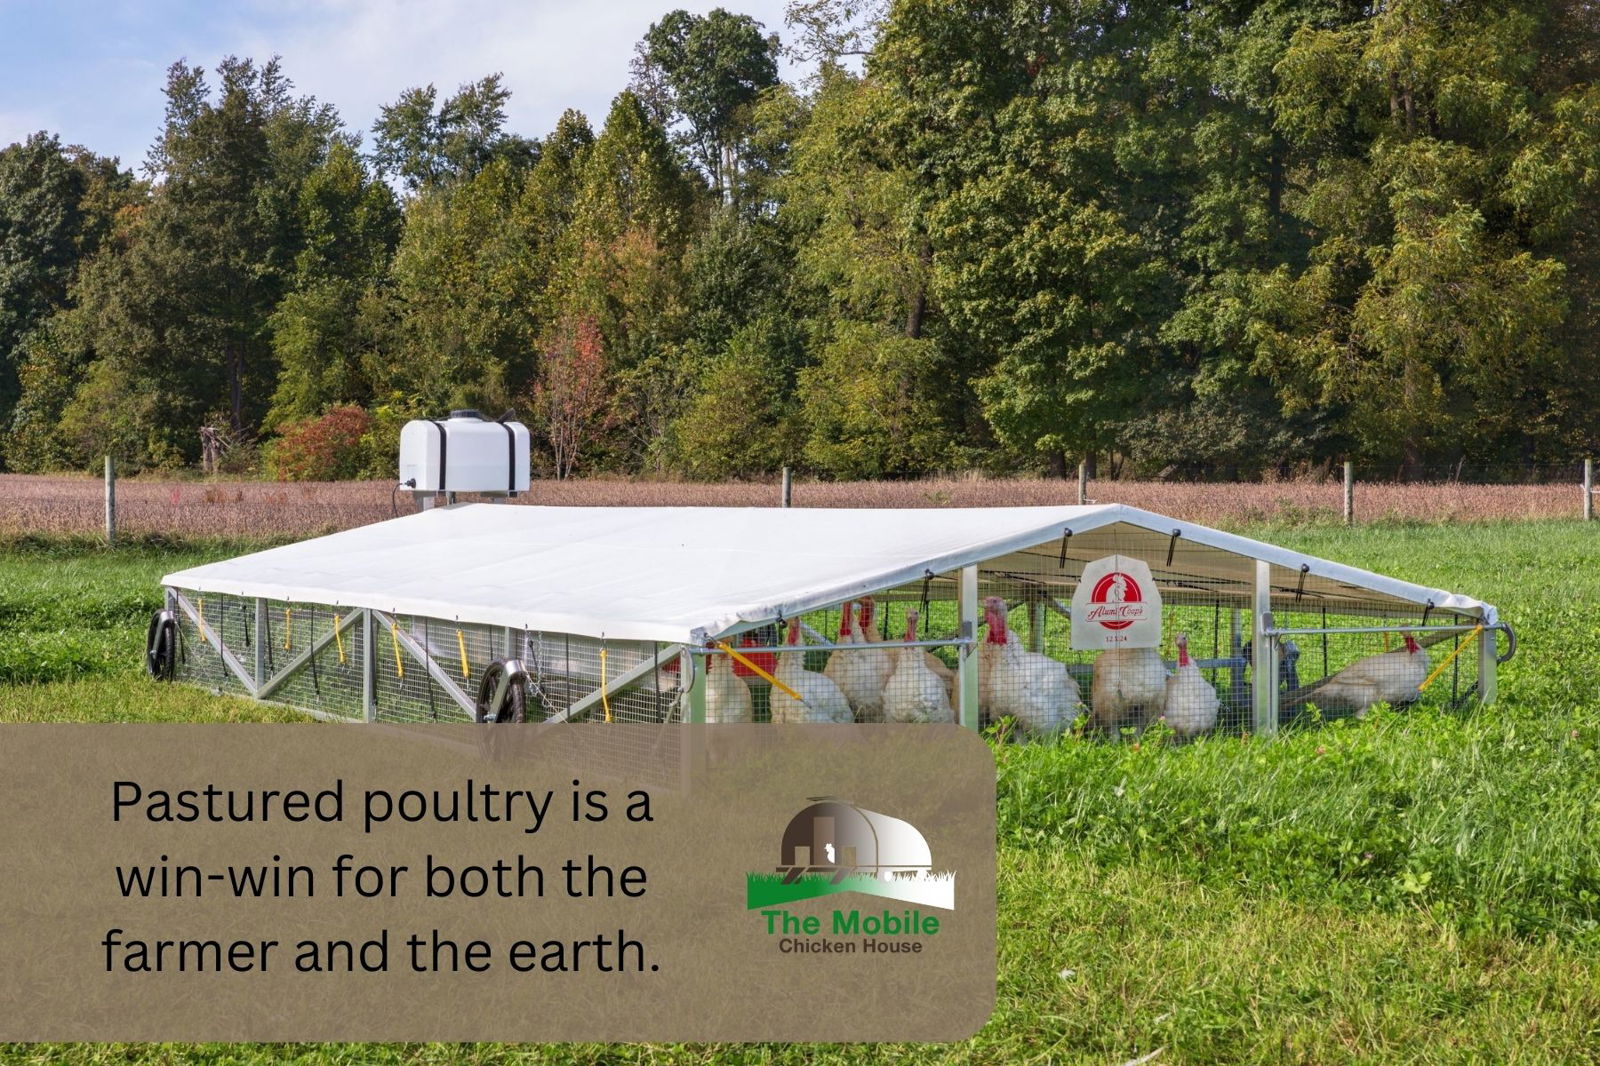 1 - Pastured poultry is a win-win